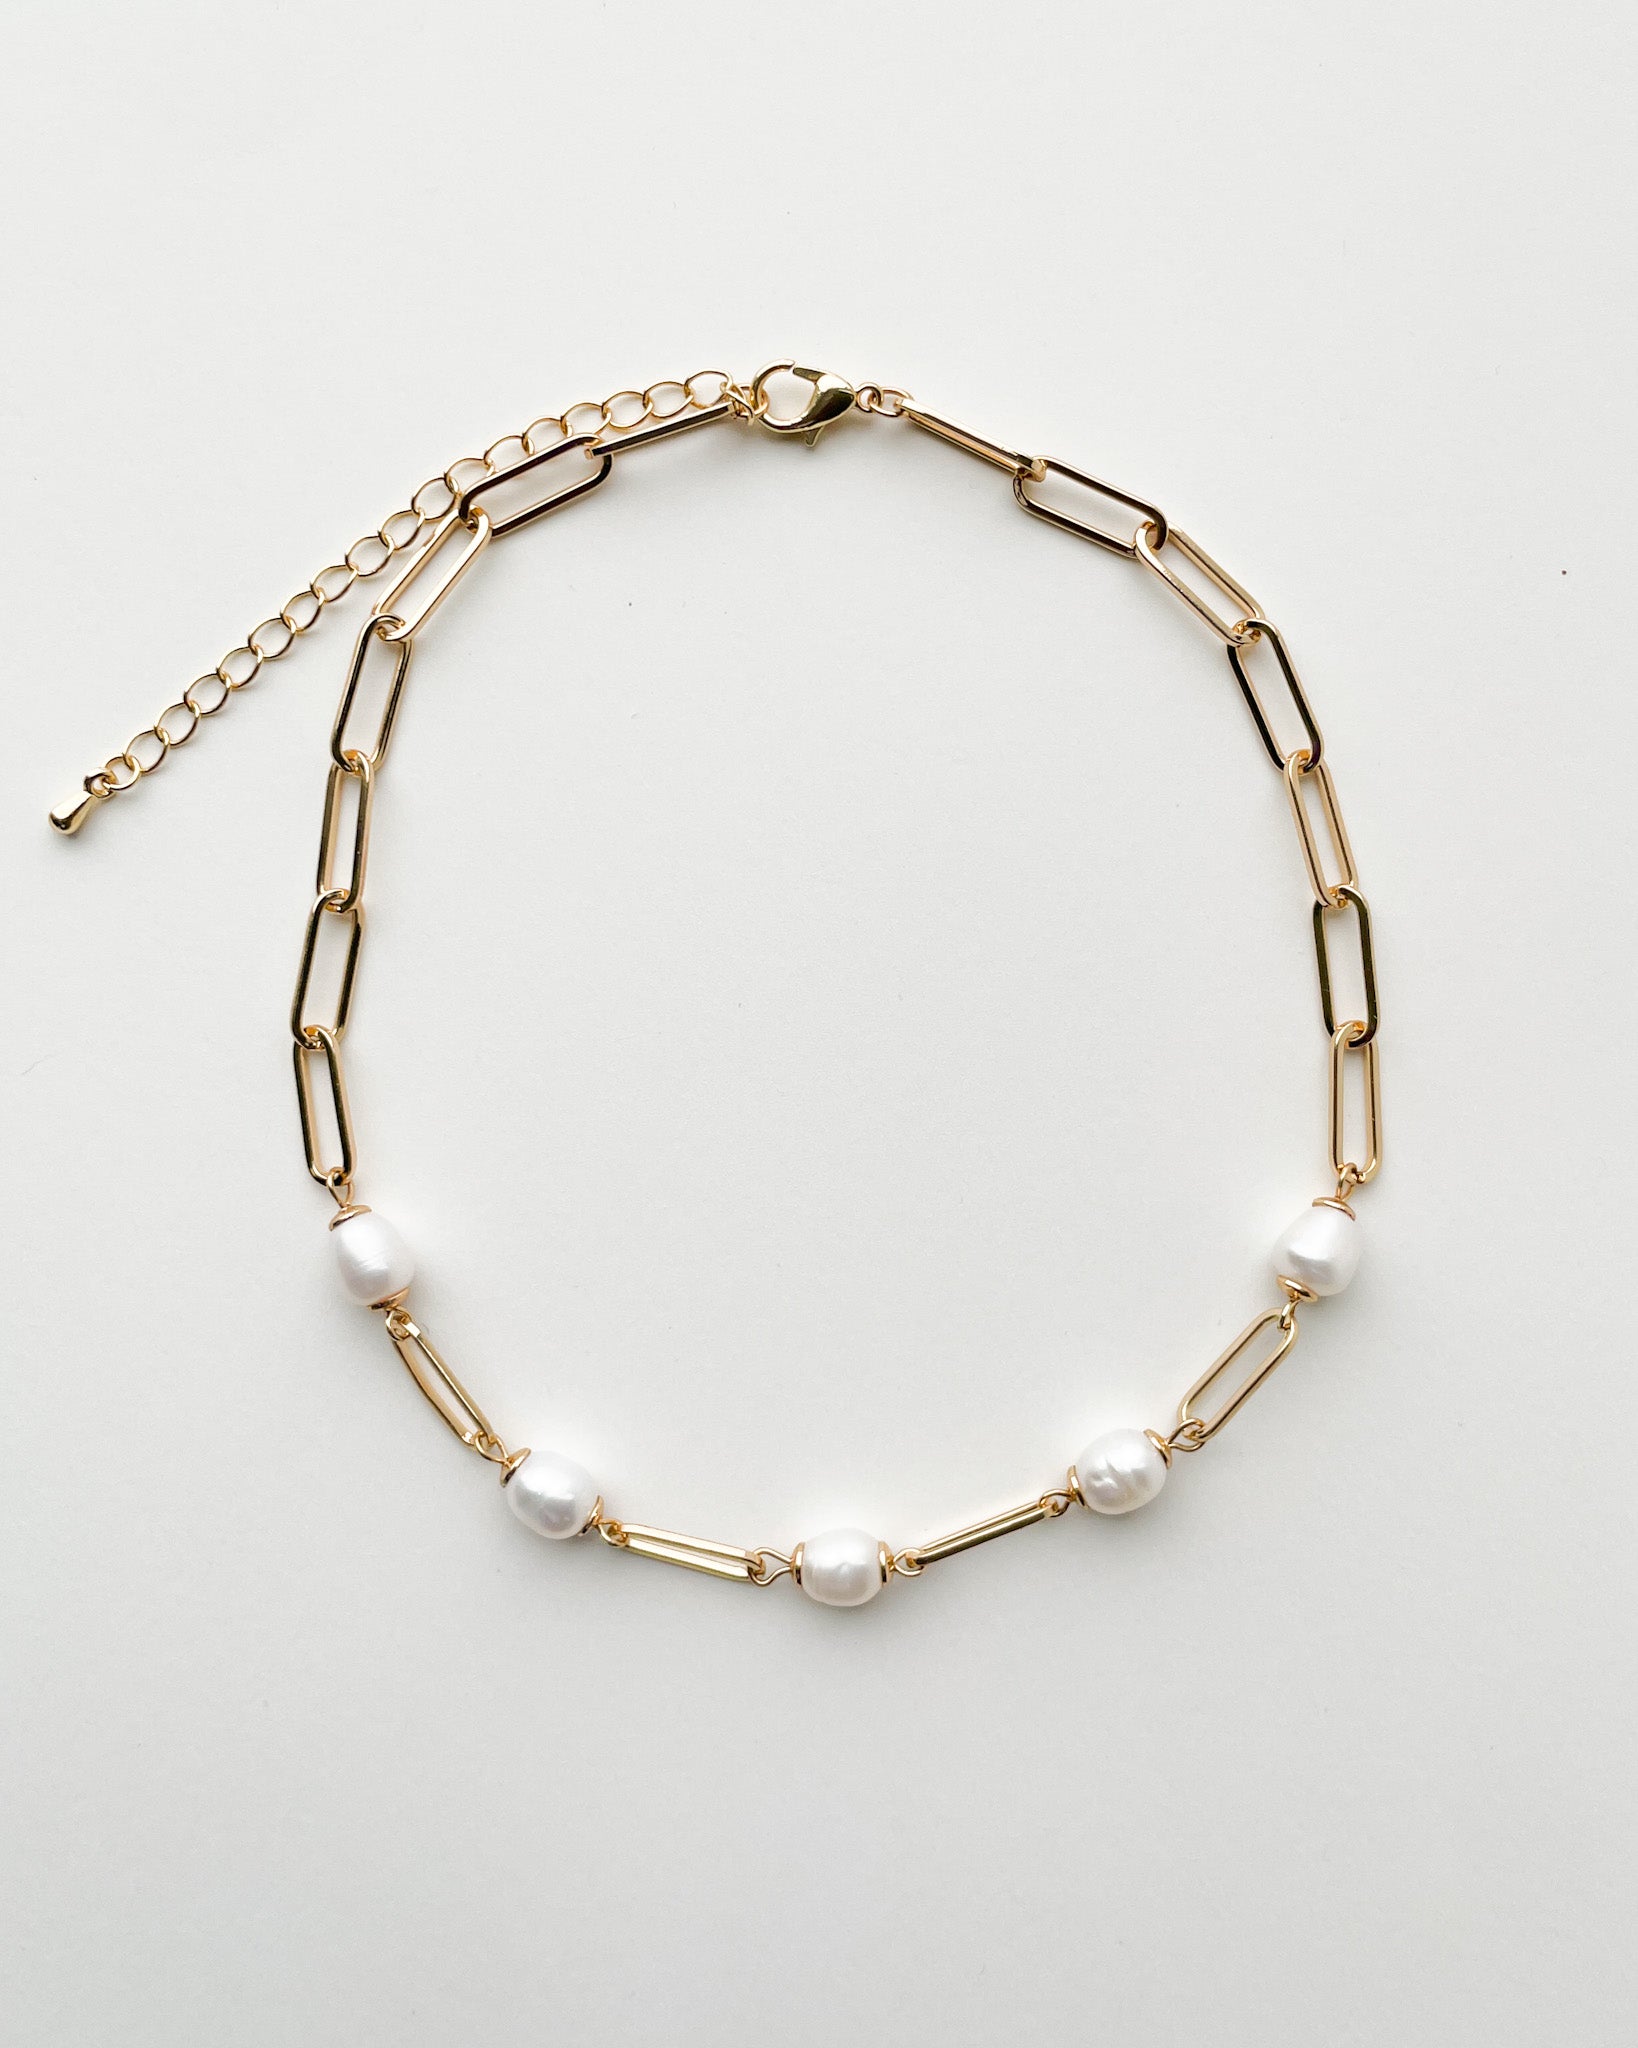 Belle Paperclip Chain and Pearl Choker Necklace